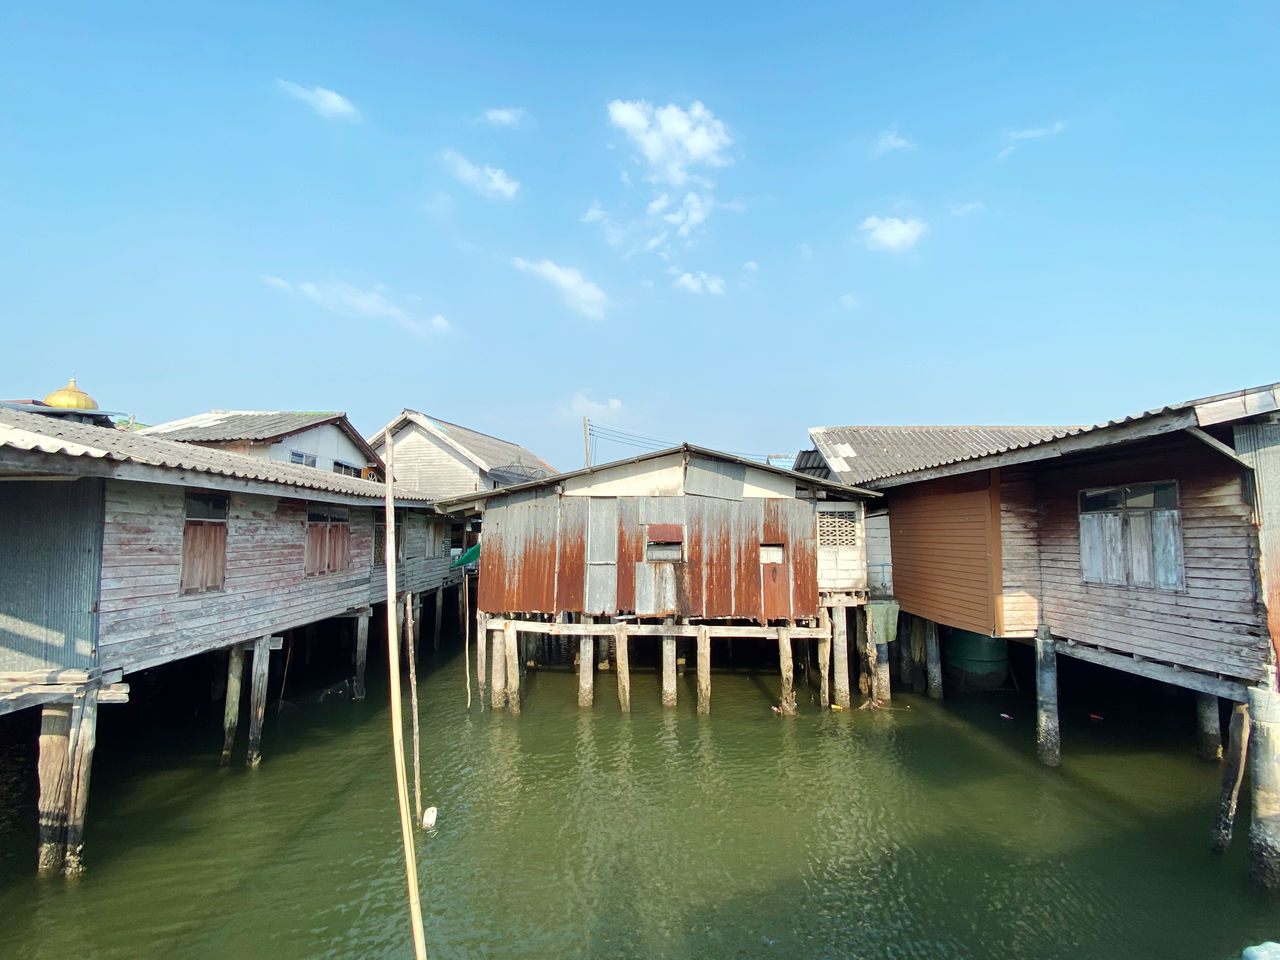 architecture, water, built structure, building exterior, building, house, stilt house, sky, nature, residential district, boathouse, day, no people, outdoors, vacation, nautical vessel, transportation, travel destinations, wood, cloud, blue, waterfront, canal, home, travel, estate